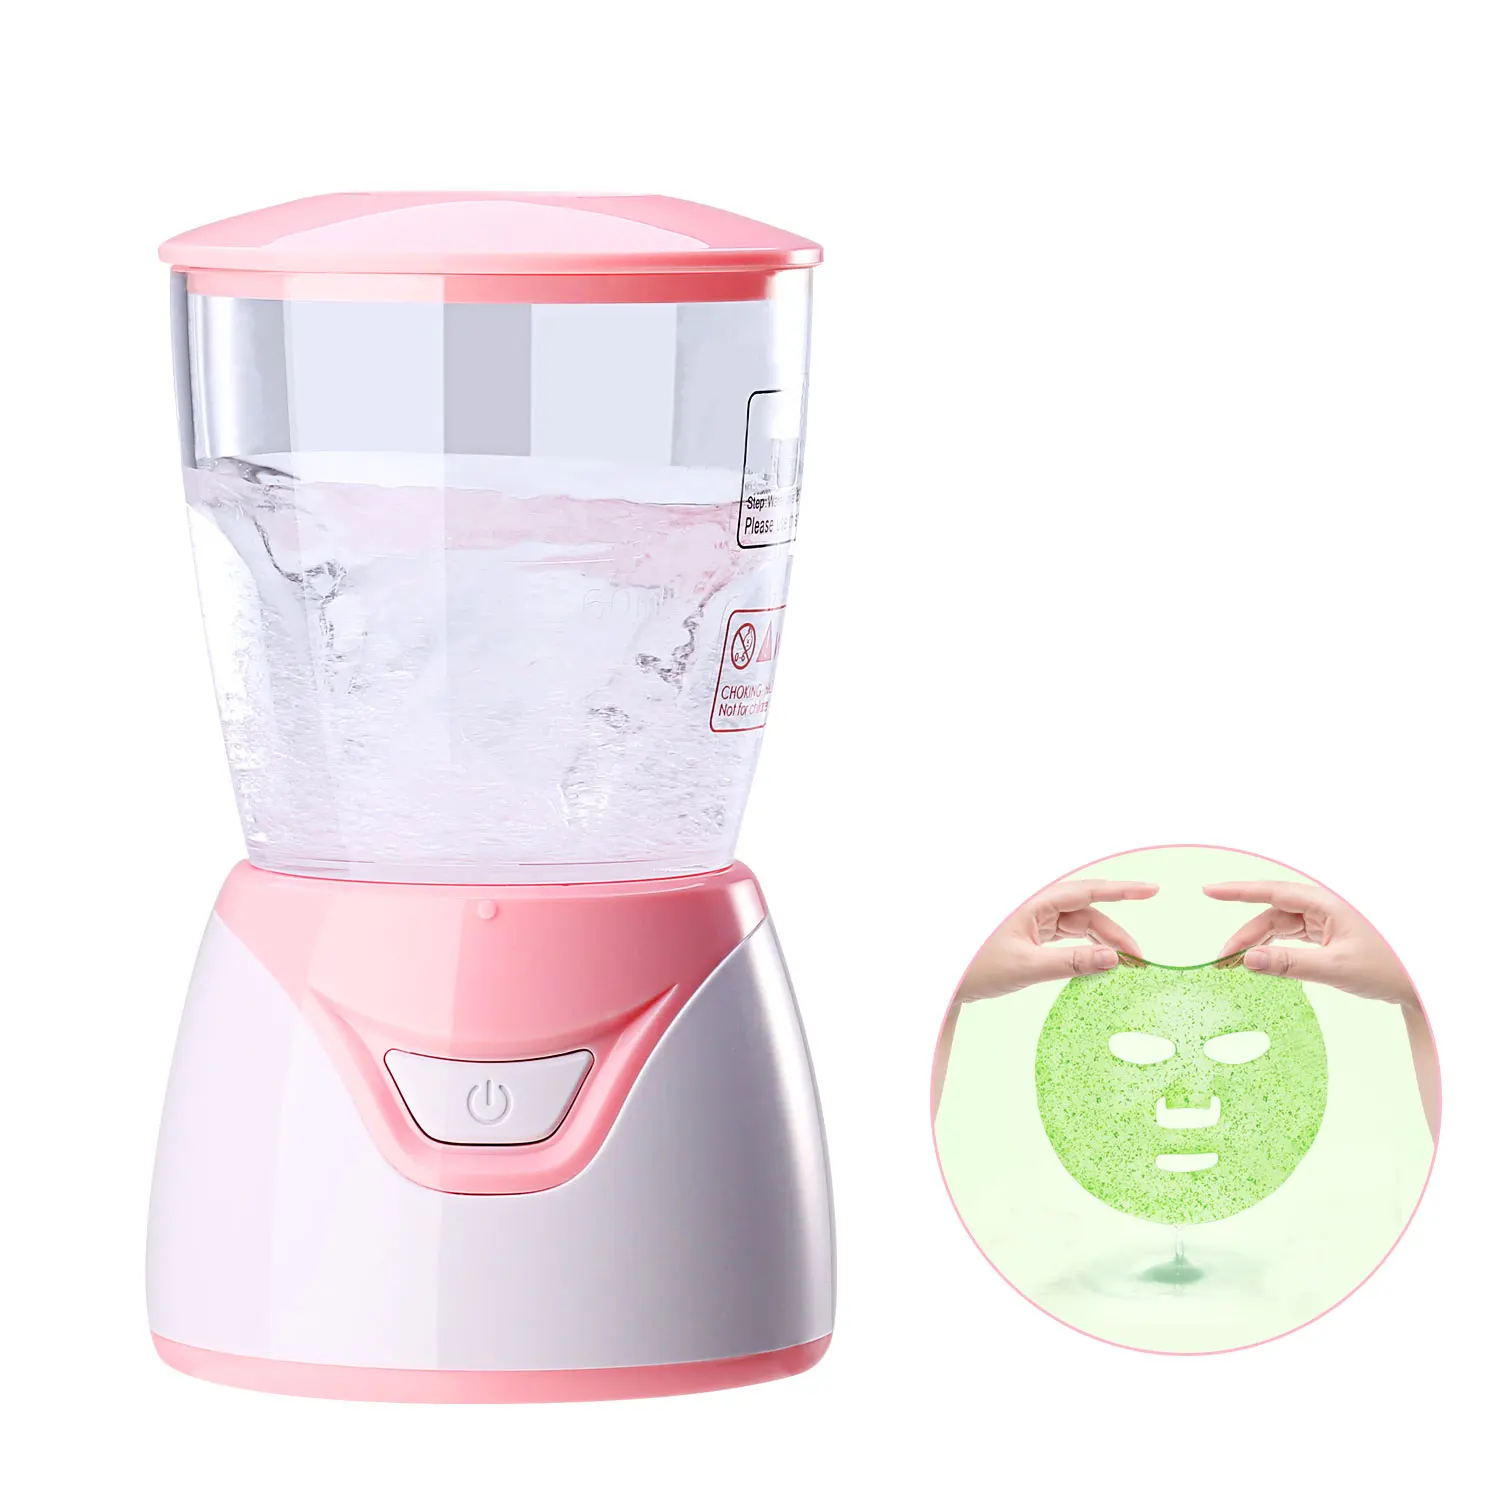 

Home Used Portable Machine a Mask Facial With Mask Collagen Beauty Mini Smart Diy Fruit And Vegetable Facial Mask Maker Machine, Pink